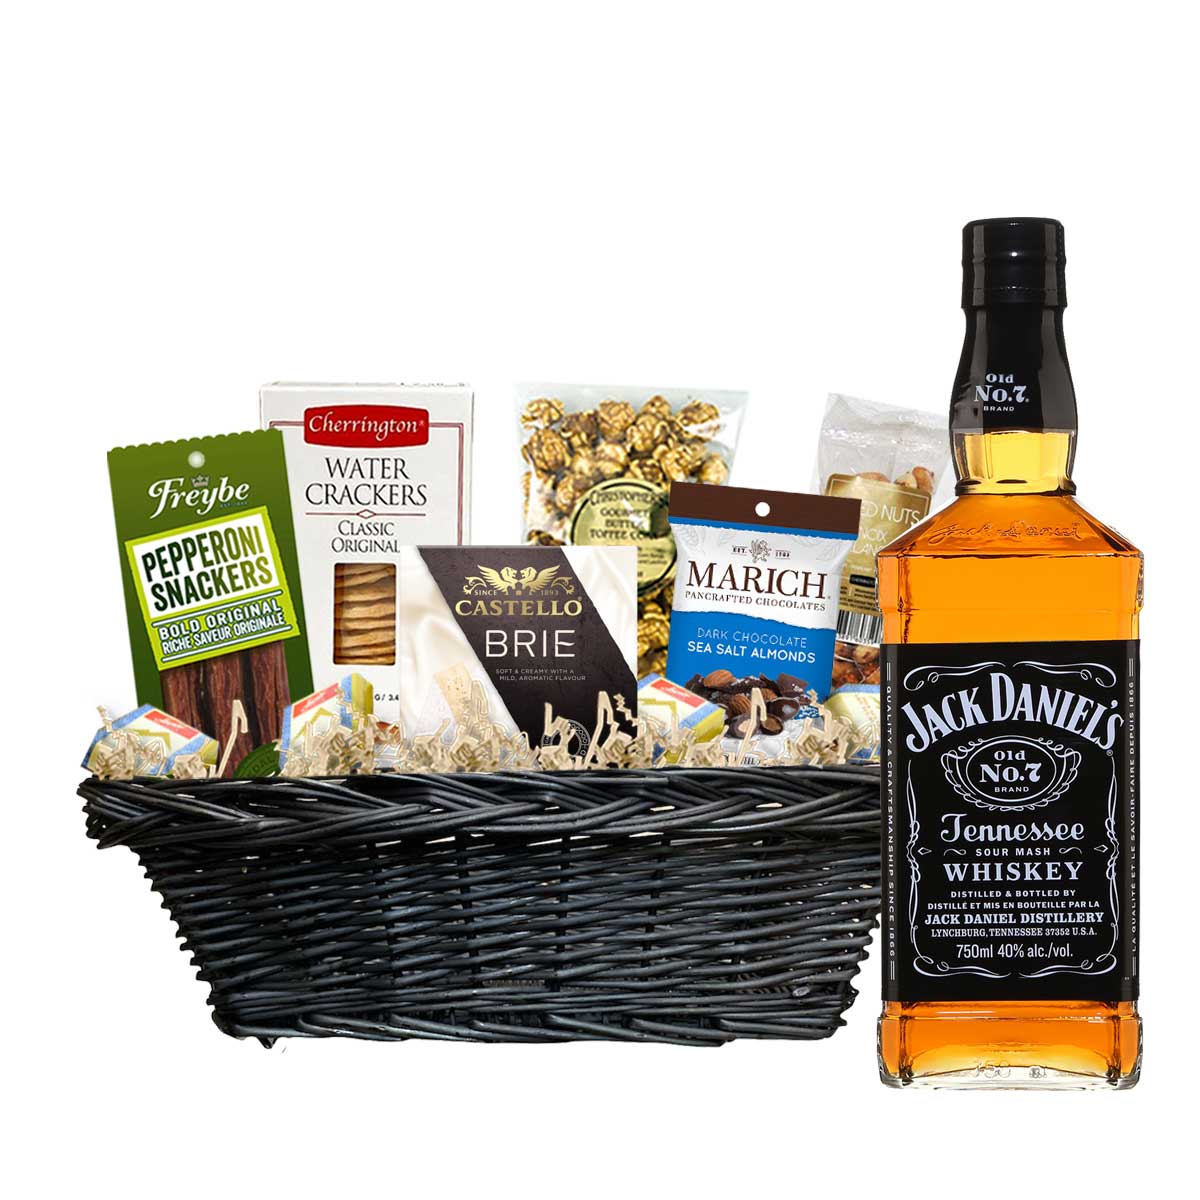 TAG Liquor Stores Canada Delivery-Jack Daniels Whisky 750ml Corporate Gift Basket-spirits-tagliquorstores.com